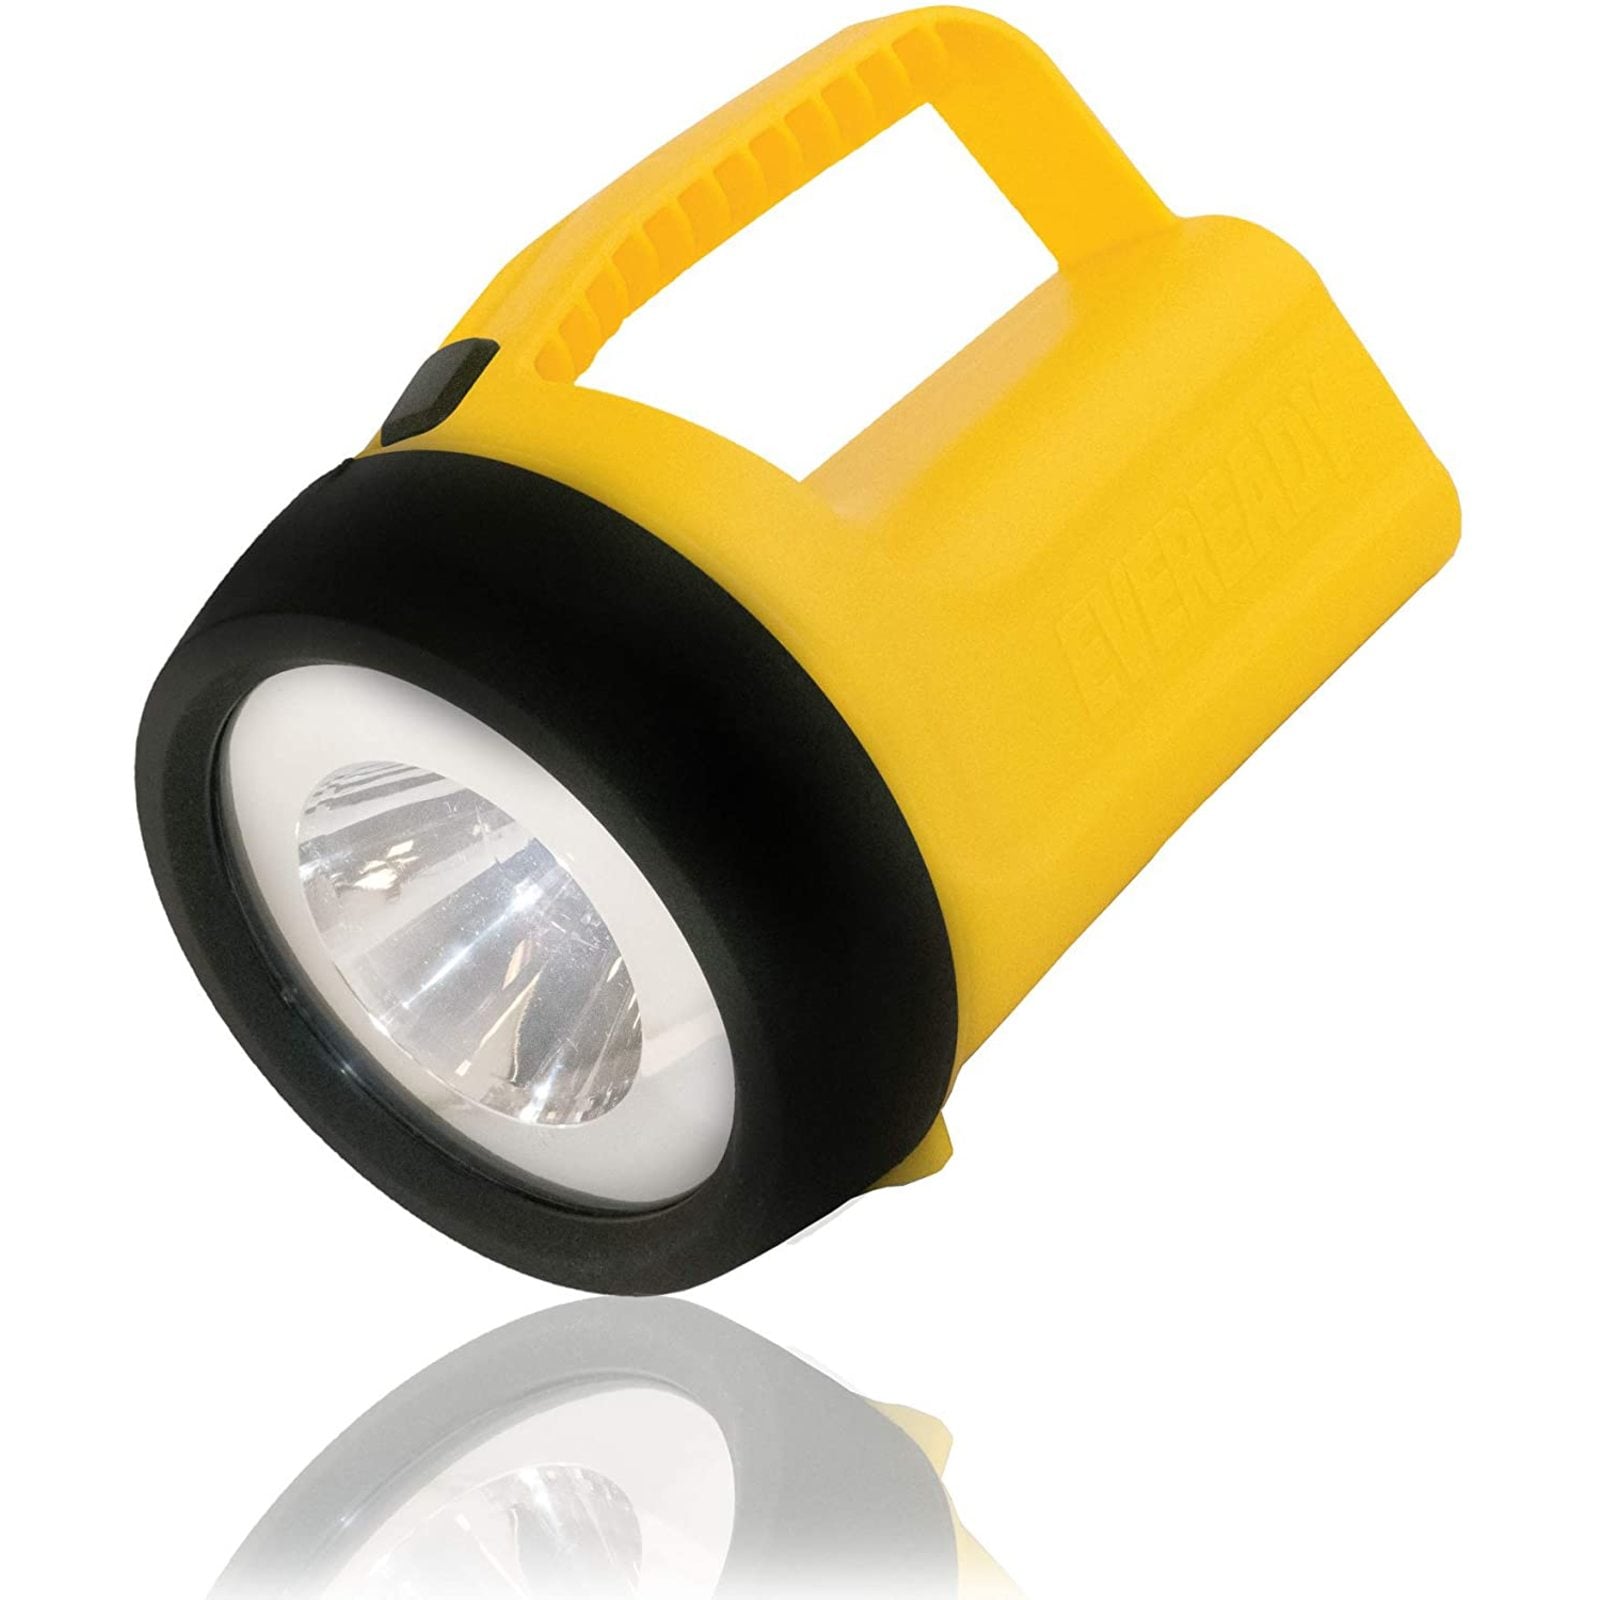 I'm looking for replacement bulbs for the Eveready Lantern Flashlight made  in the 90's. It is special to me. Does anyone know where I can buy a  replacement bulb? Information on the